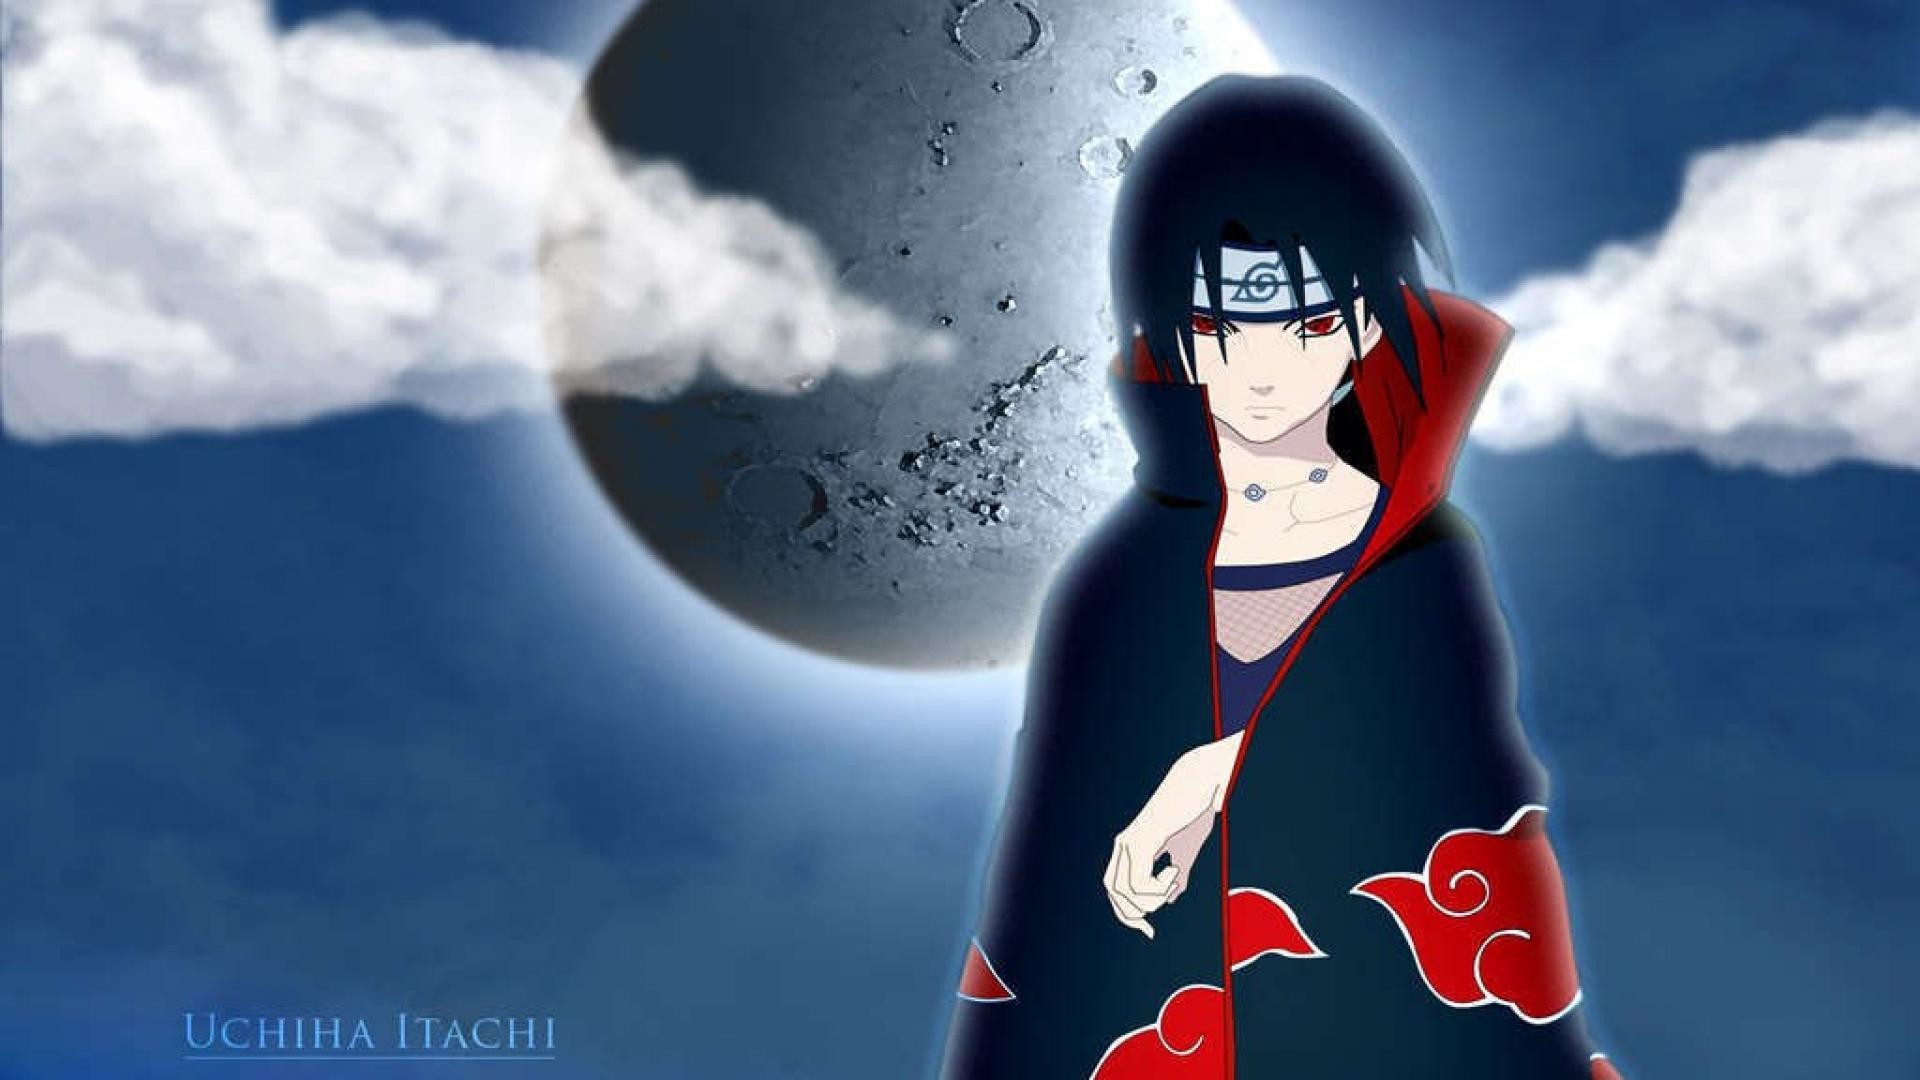 1920x1080  Popular Images Of Itachi Uchiha Wallpaper Hd For Awesome Wallpaper